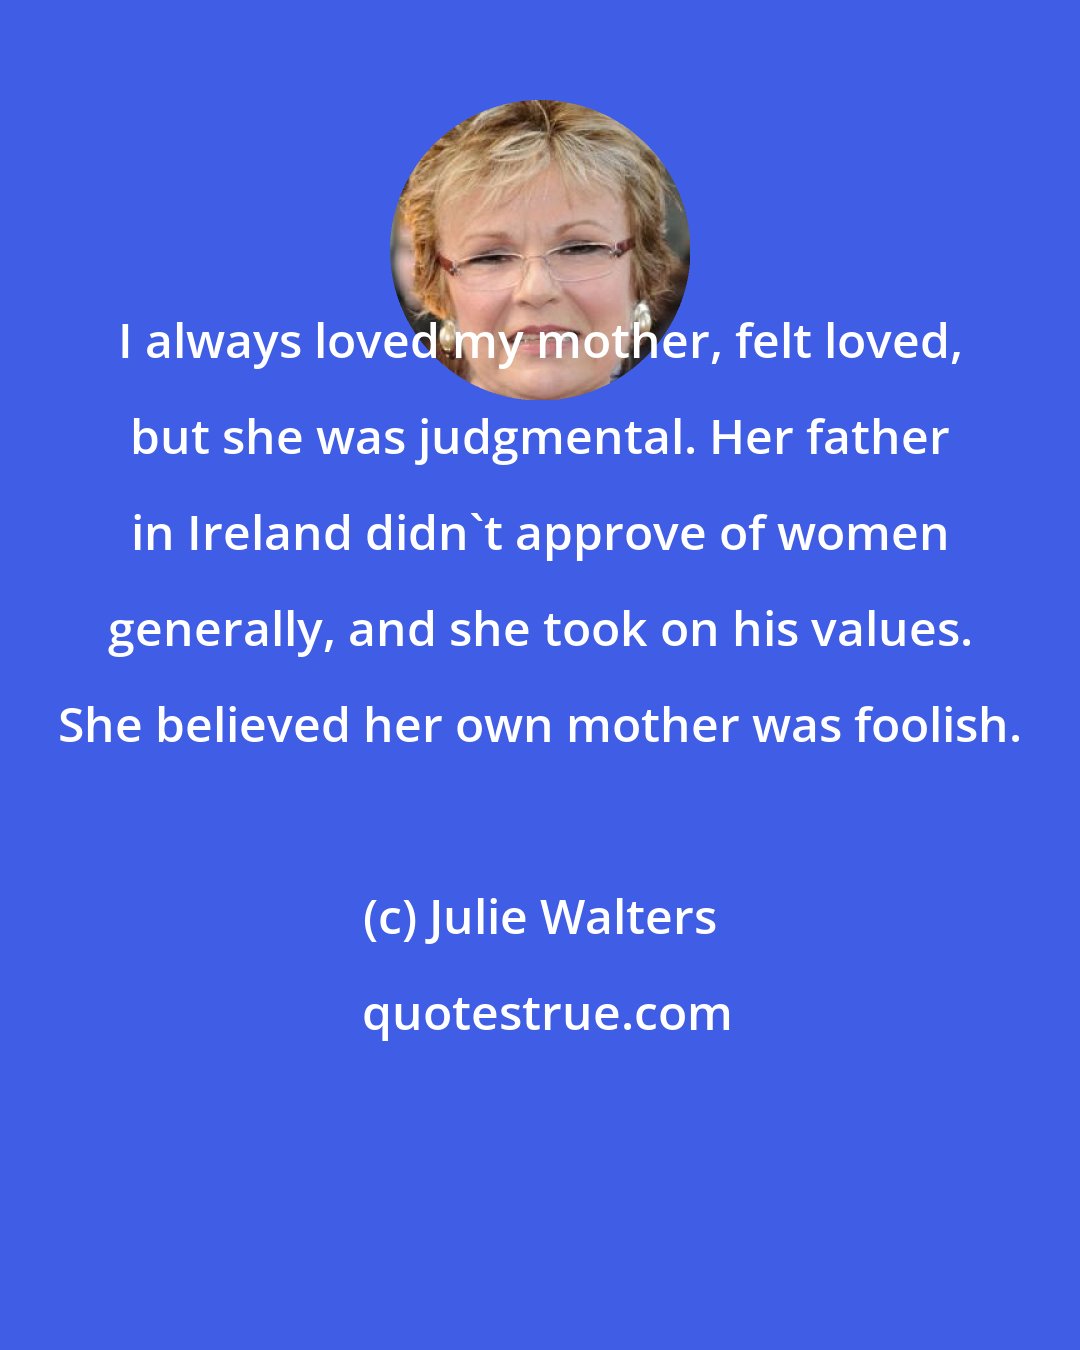 Julie Walters: I always loved my mother, felt loved, but she was judgmental. Her father in Ireland didn't approve of women generally, and she took on his values. She believed her own mother was foolish.